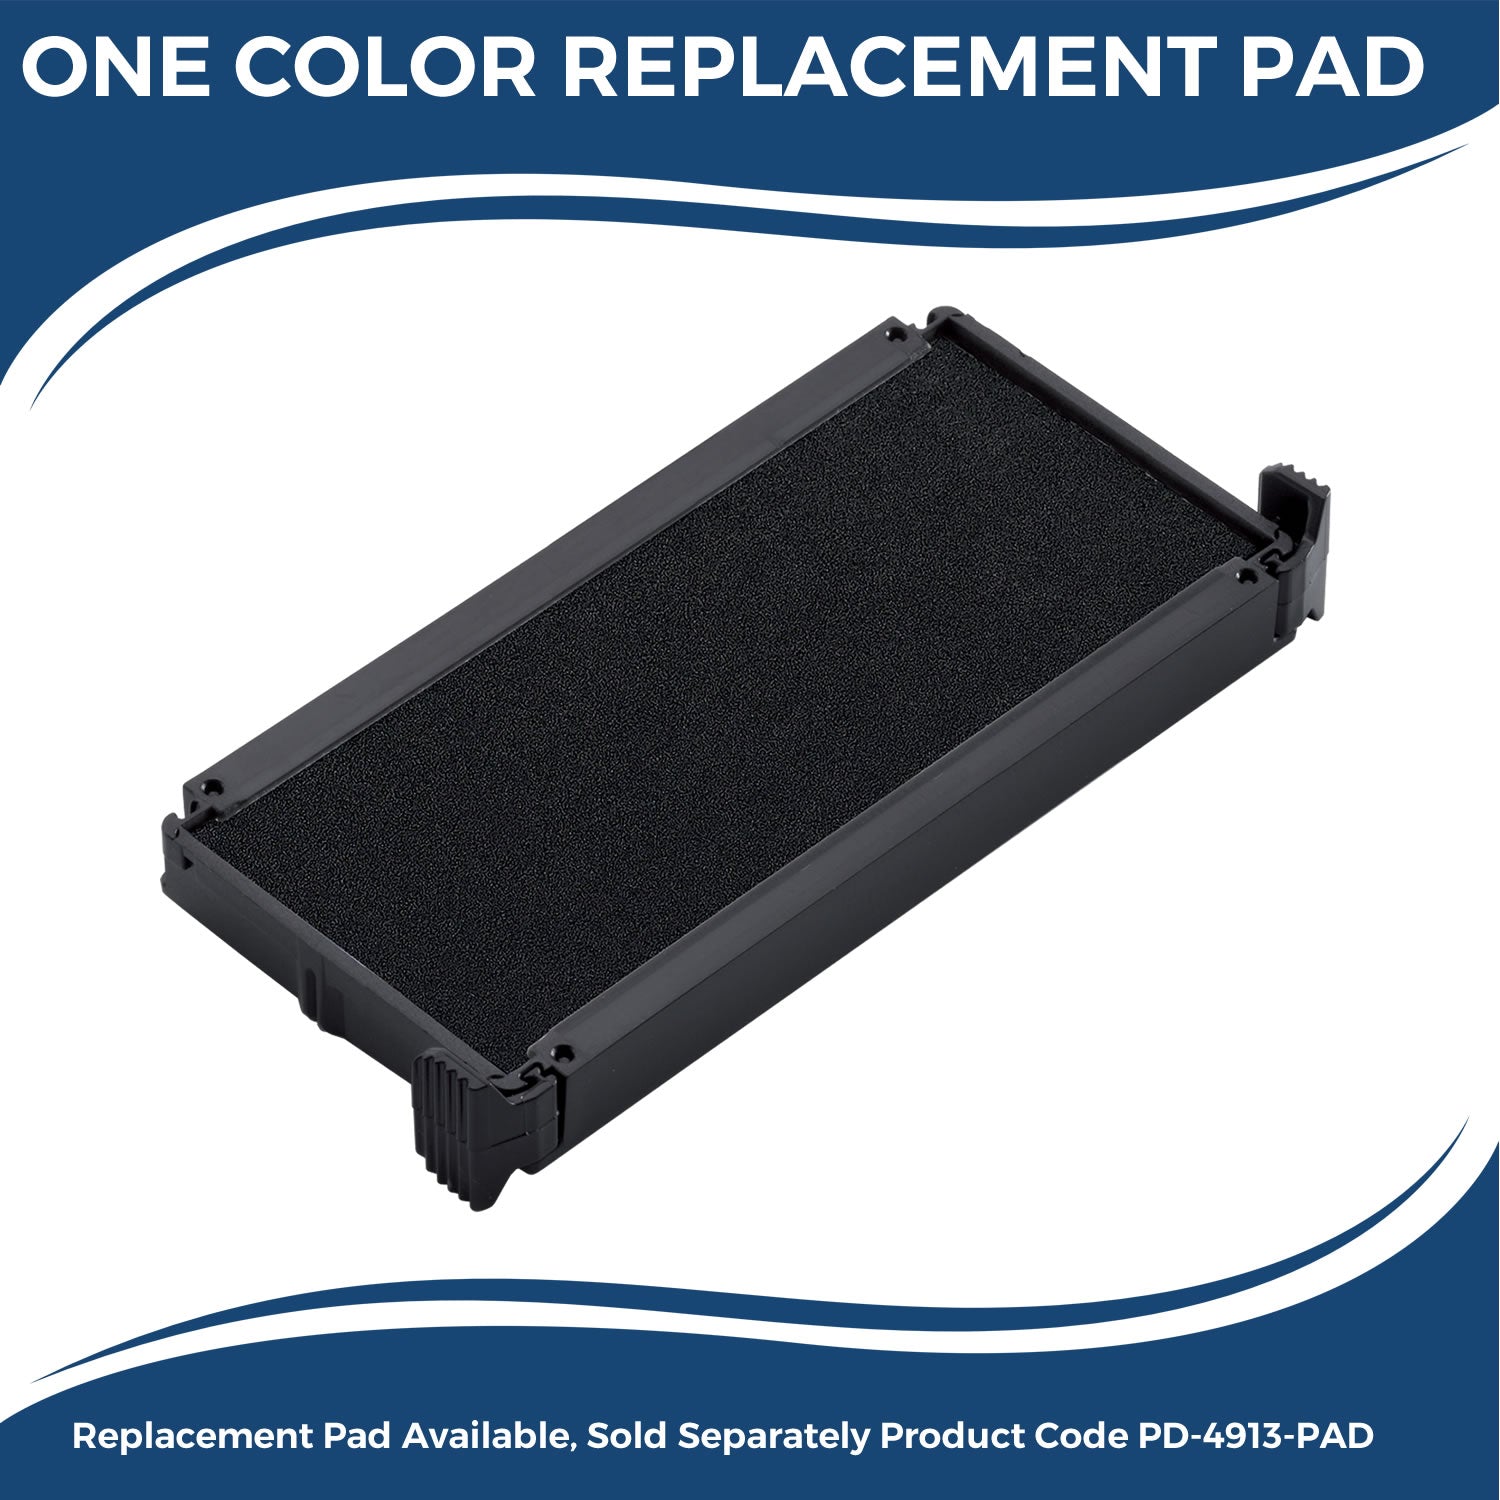 Large Self-Inking Archivado Stamp 5536S Large Replacment Pad